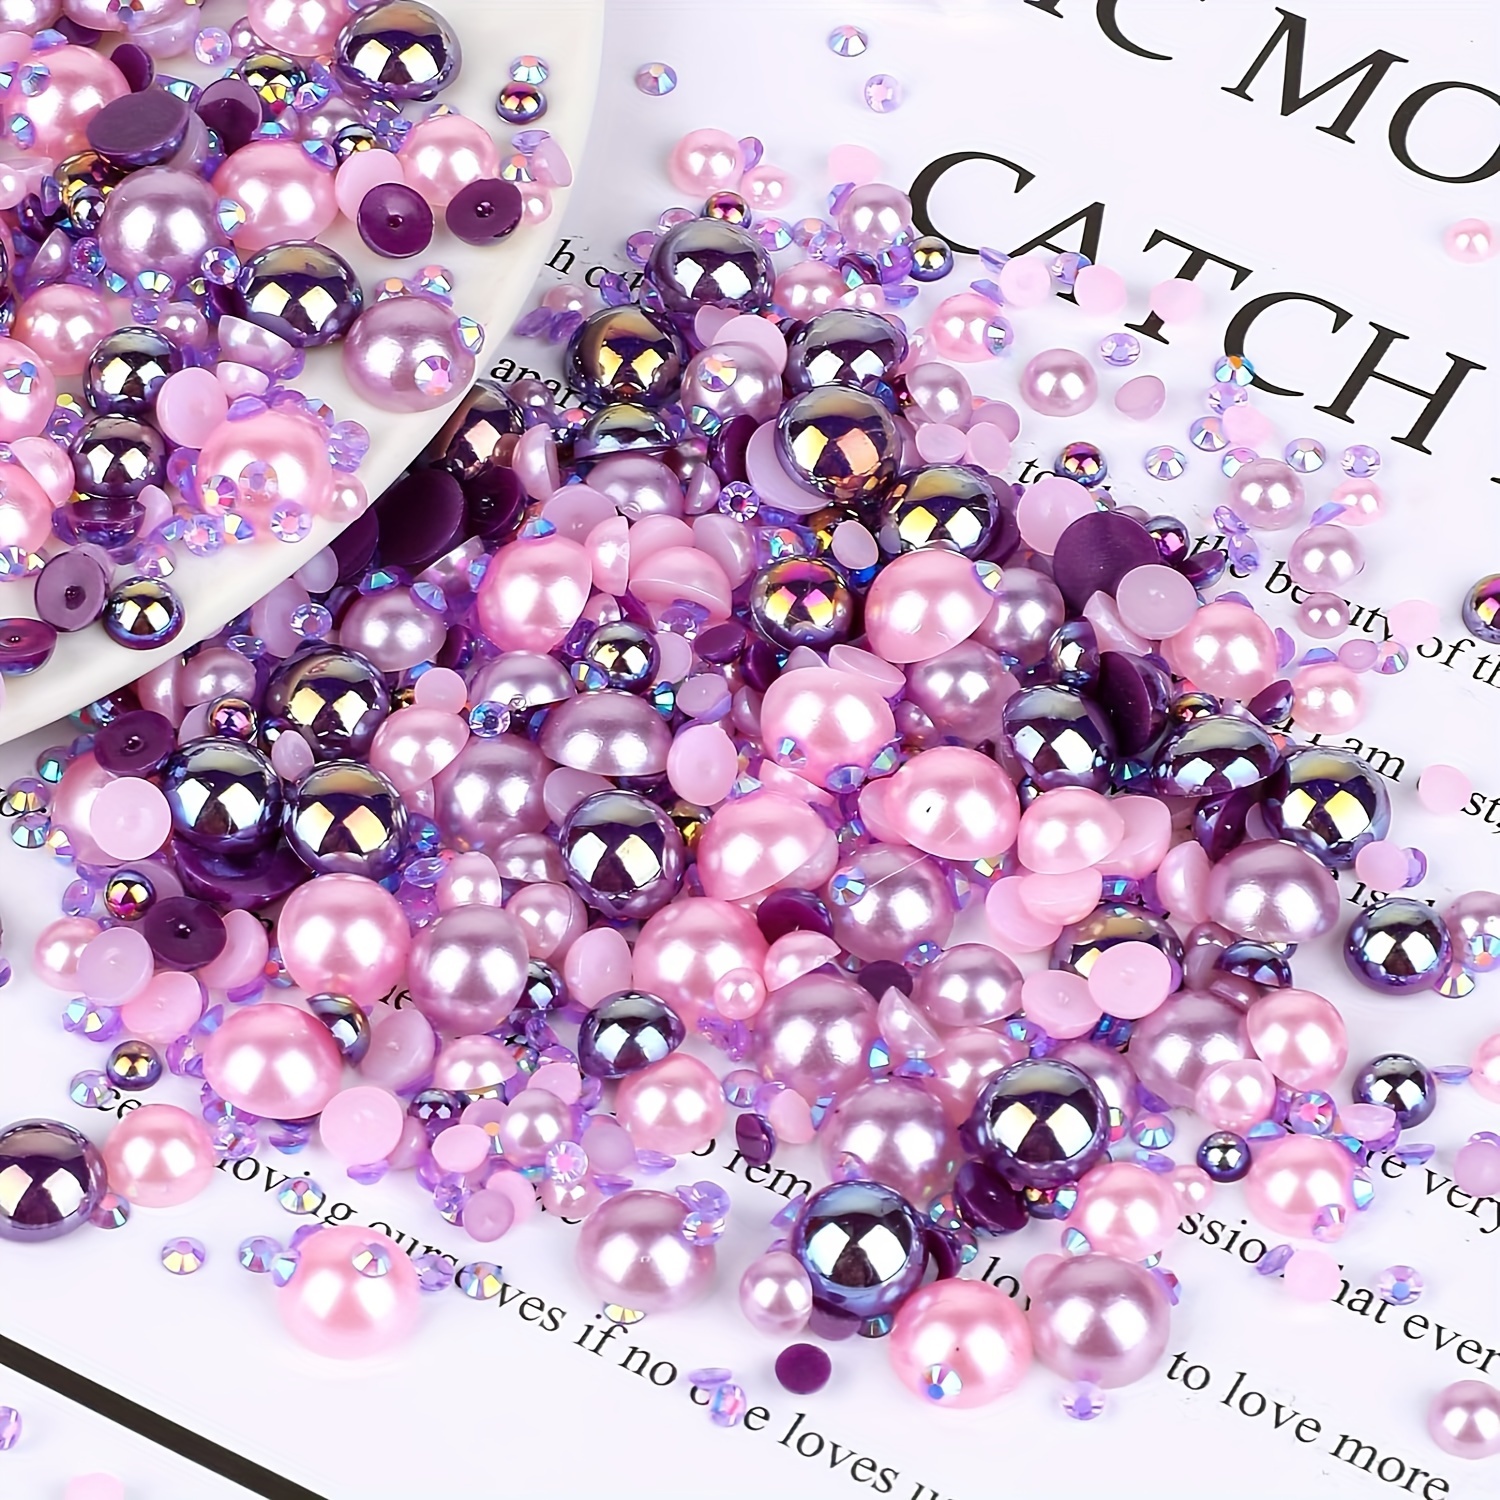 

35g Mixed Size Purple Flatback Pearls And Rhinestones Set, Unscented Resin Gems For Nail Art, Diy Crafts, Face Art, Shoes, And Clothing Embellishments - Assorted 3-10mm Pearl And Rhinestone Pack